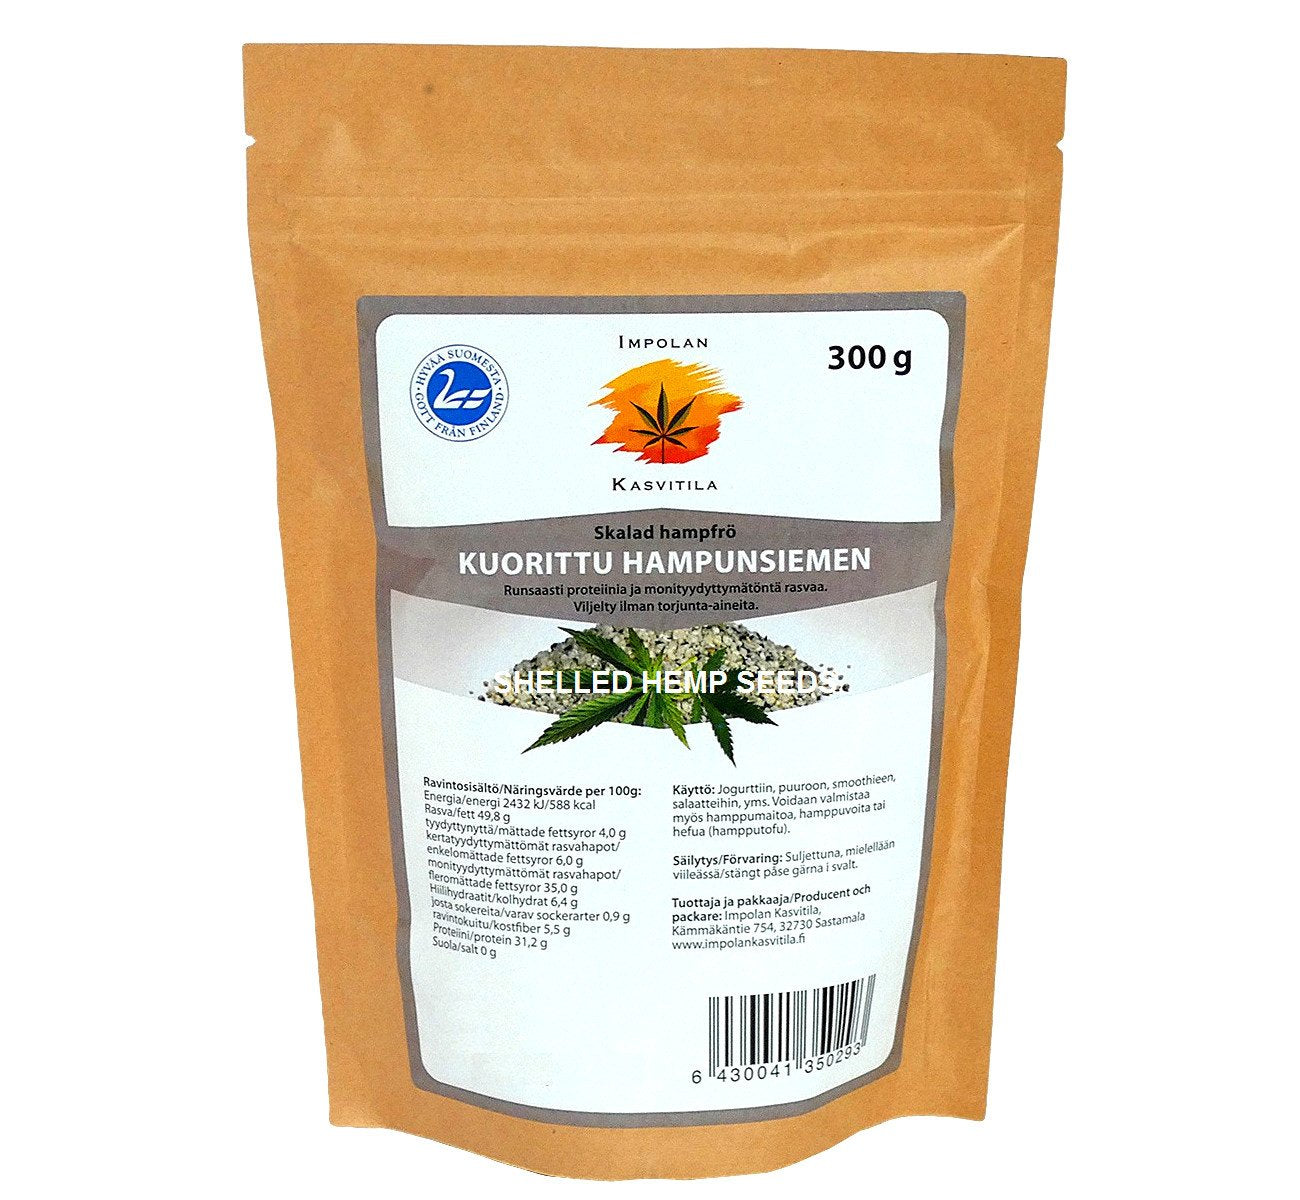 Bag of ecological shelled hemp seed 300 g, all-natural protein burst, produced in Scandinavia